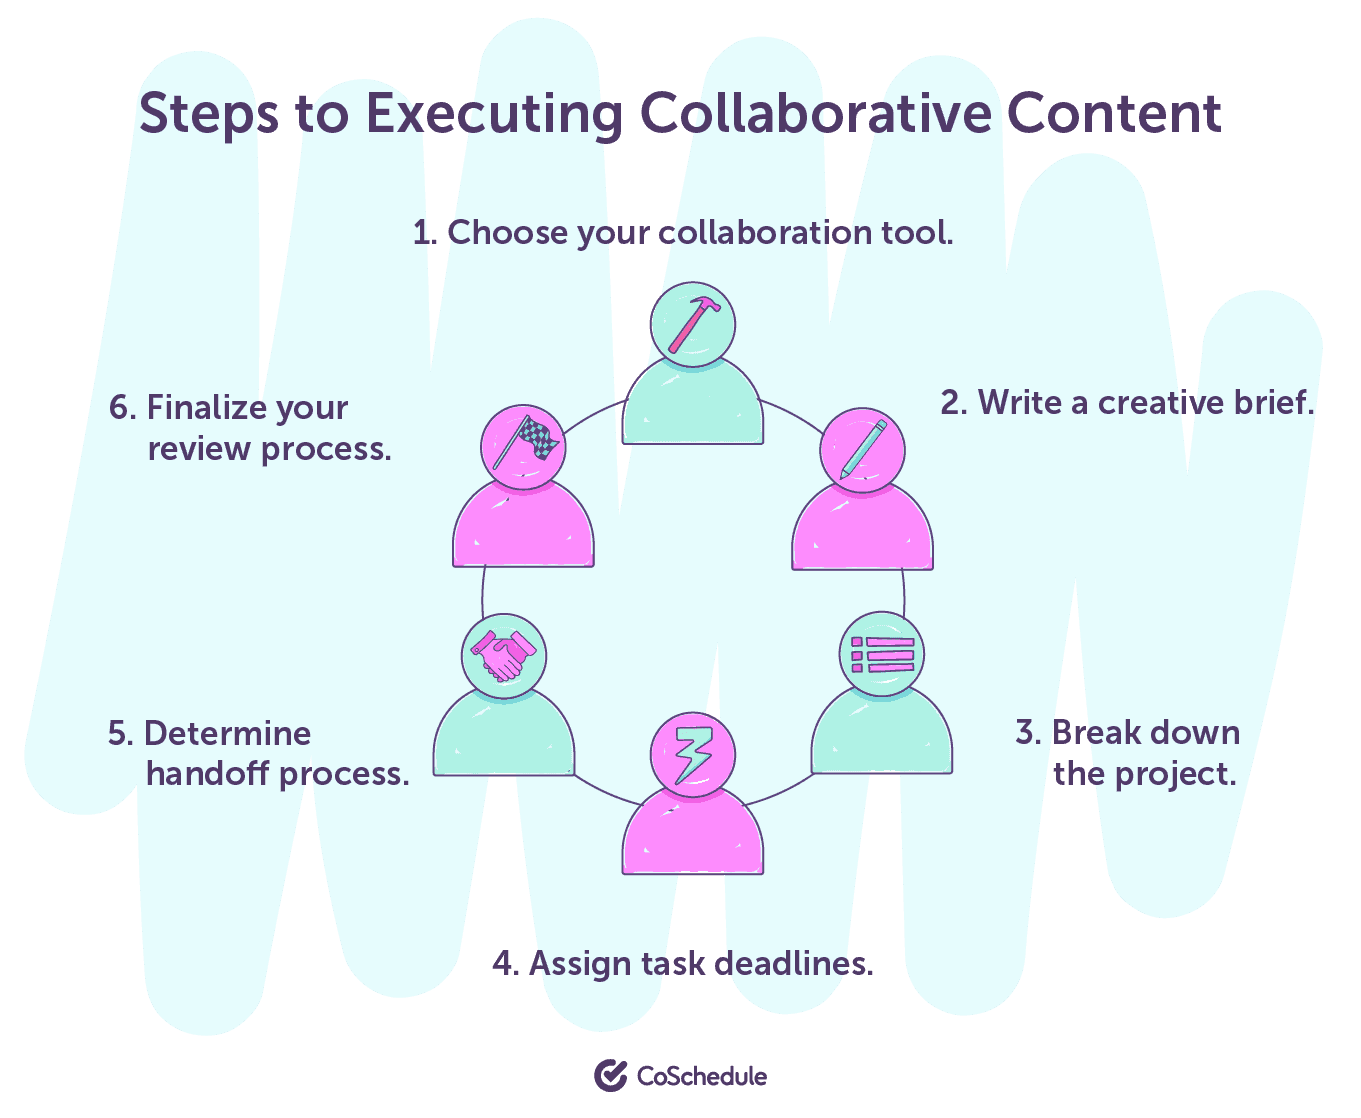 Steps to executing collaborative content